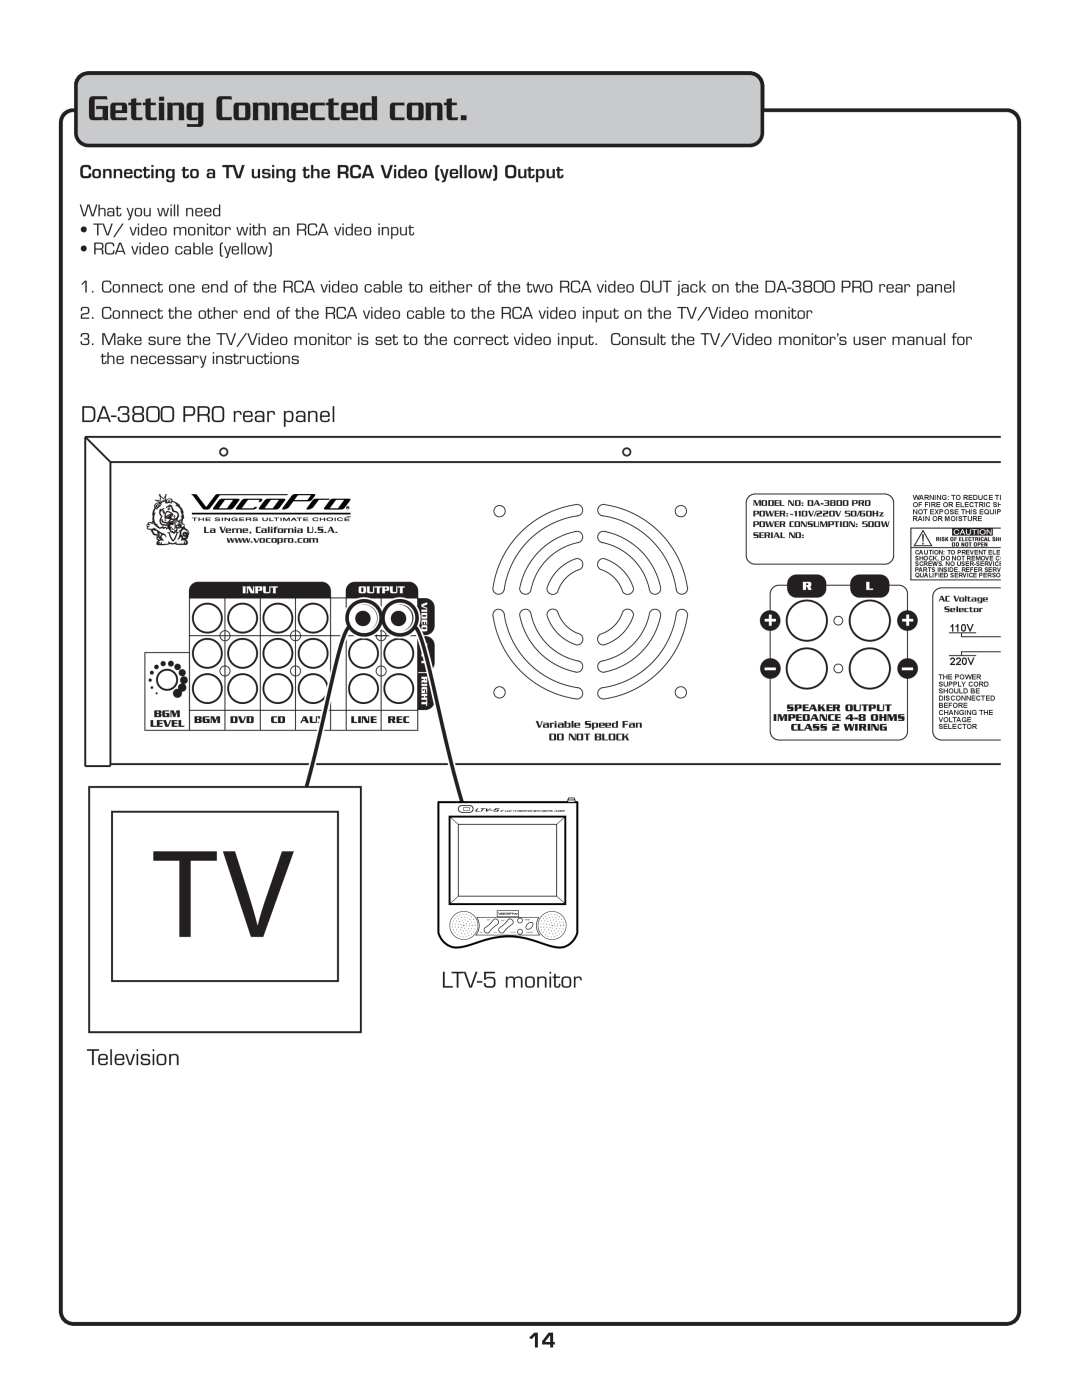 VocoPro DA-3800 PRO owner manual Getting Connected cont, Connecting to a TV using the RCA Video yellow Output 